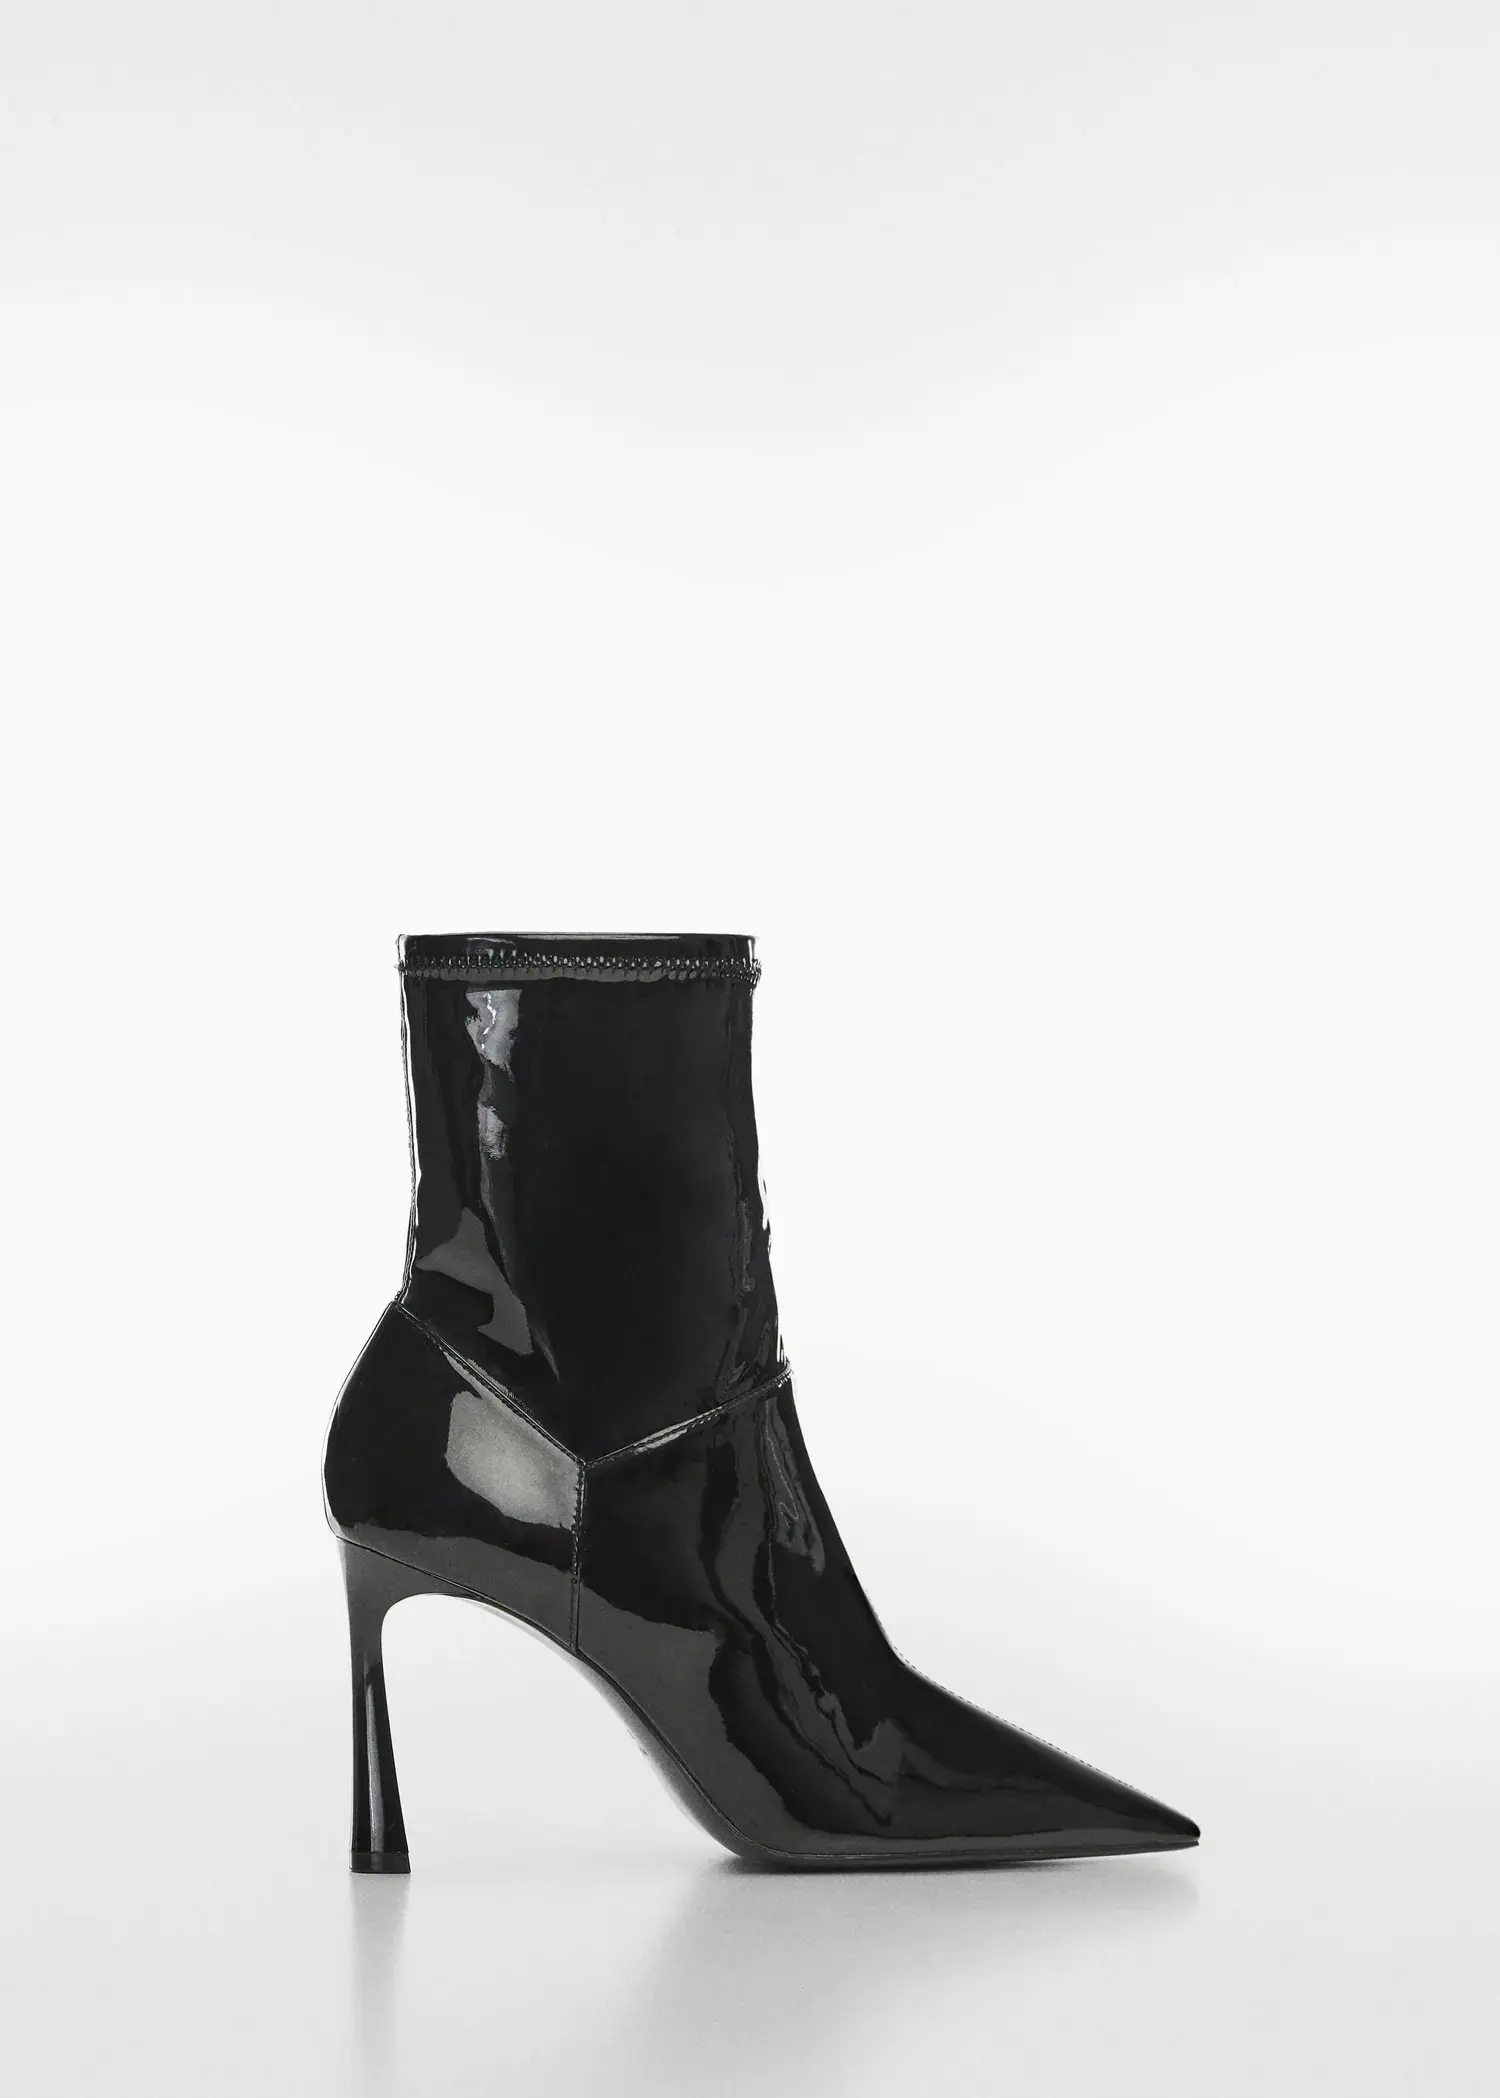 Mango Patent leather-effect heeled ankle boots. 2